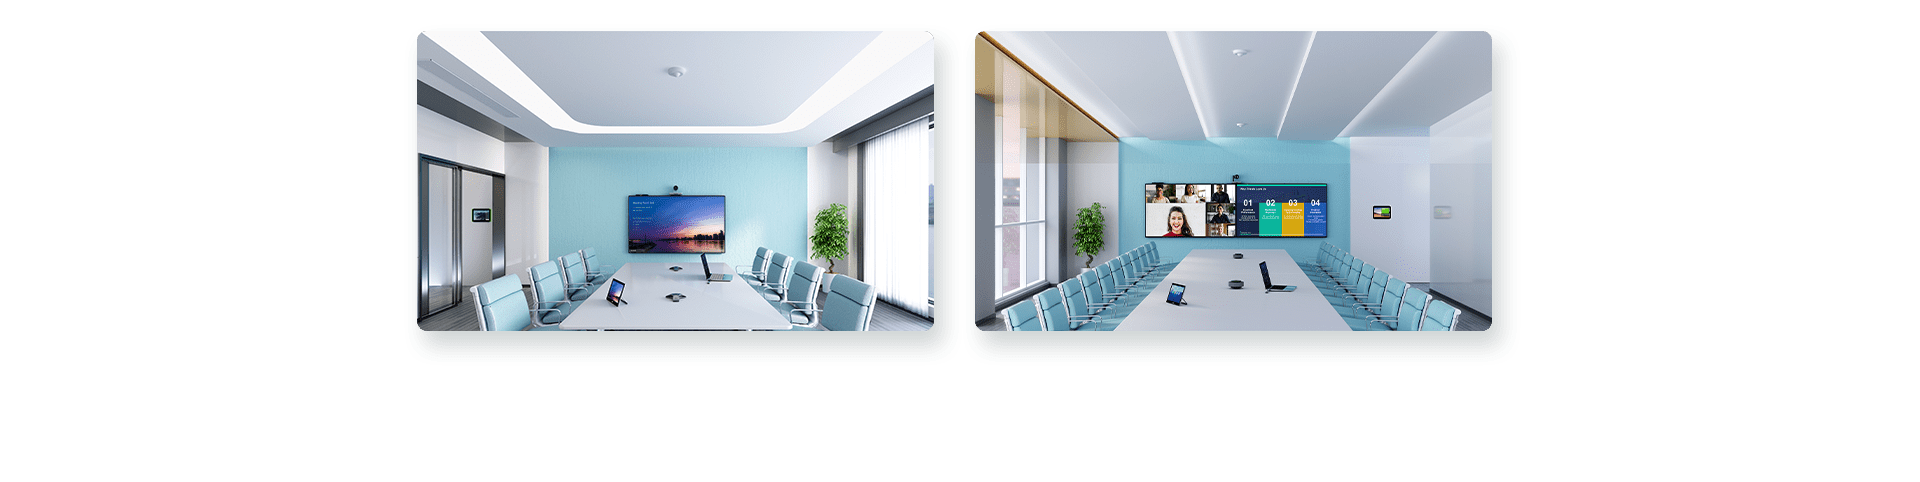 passive infrared sensor for video conference system